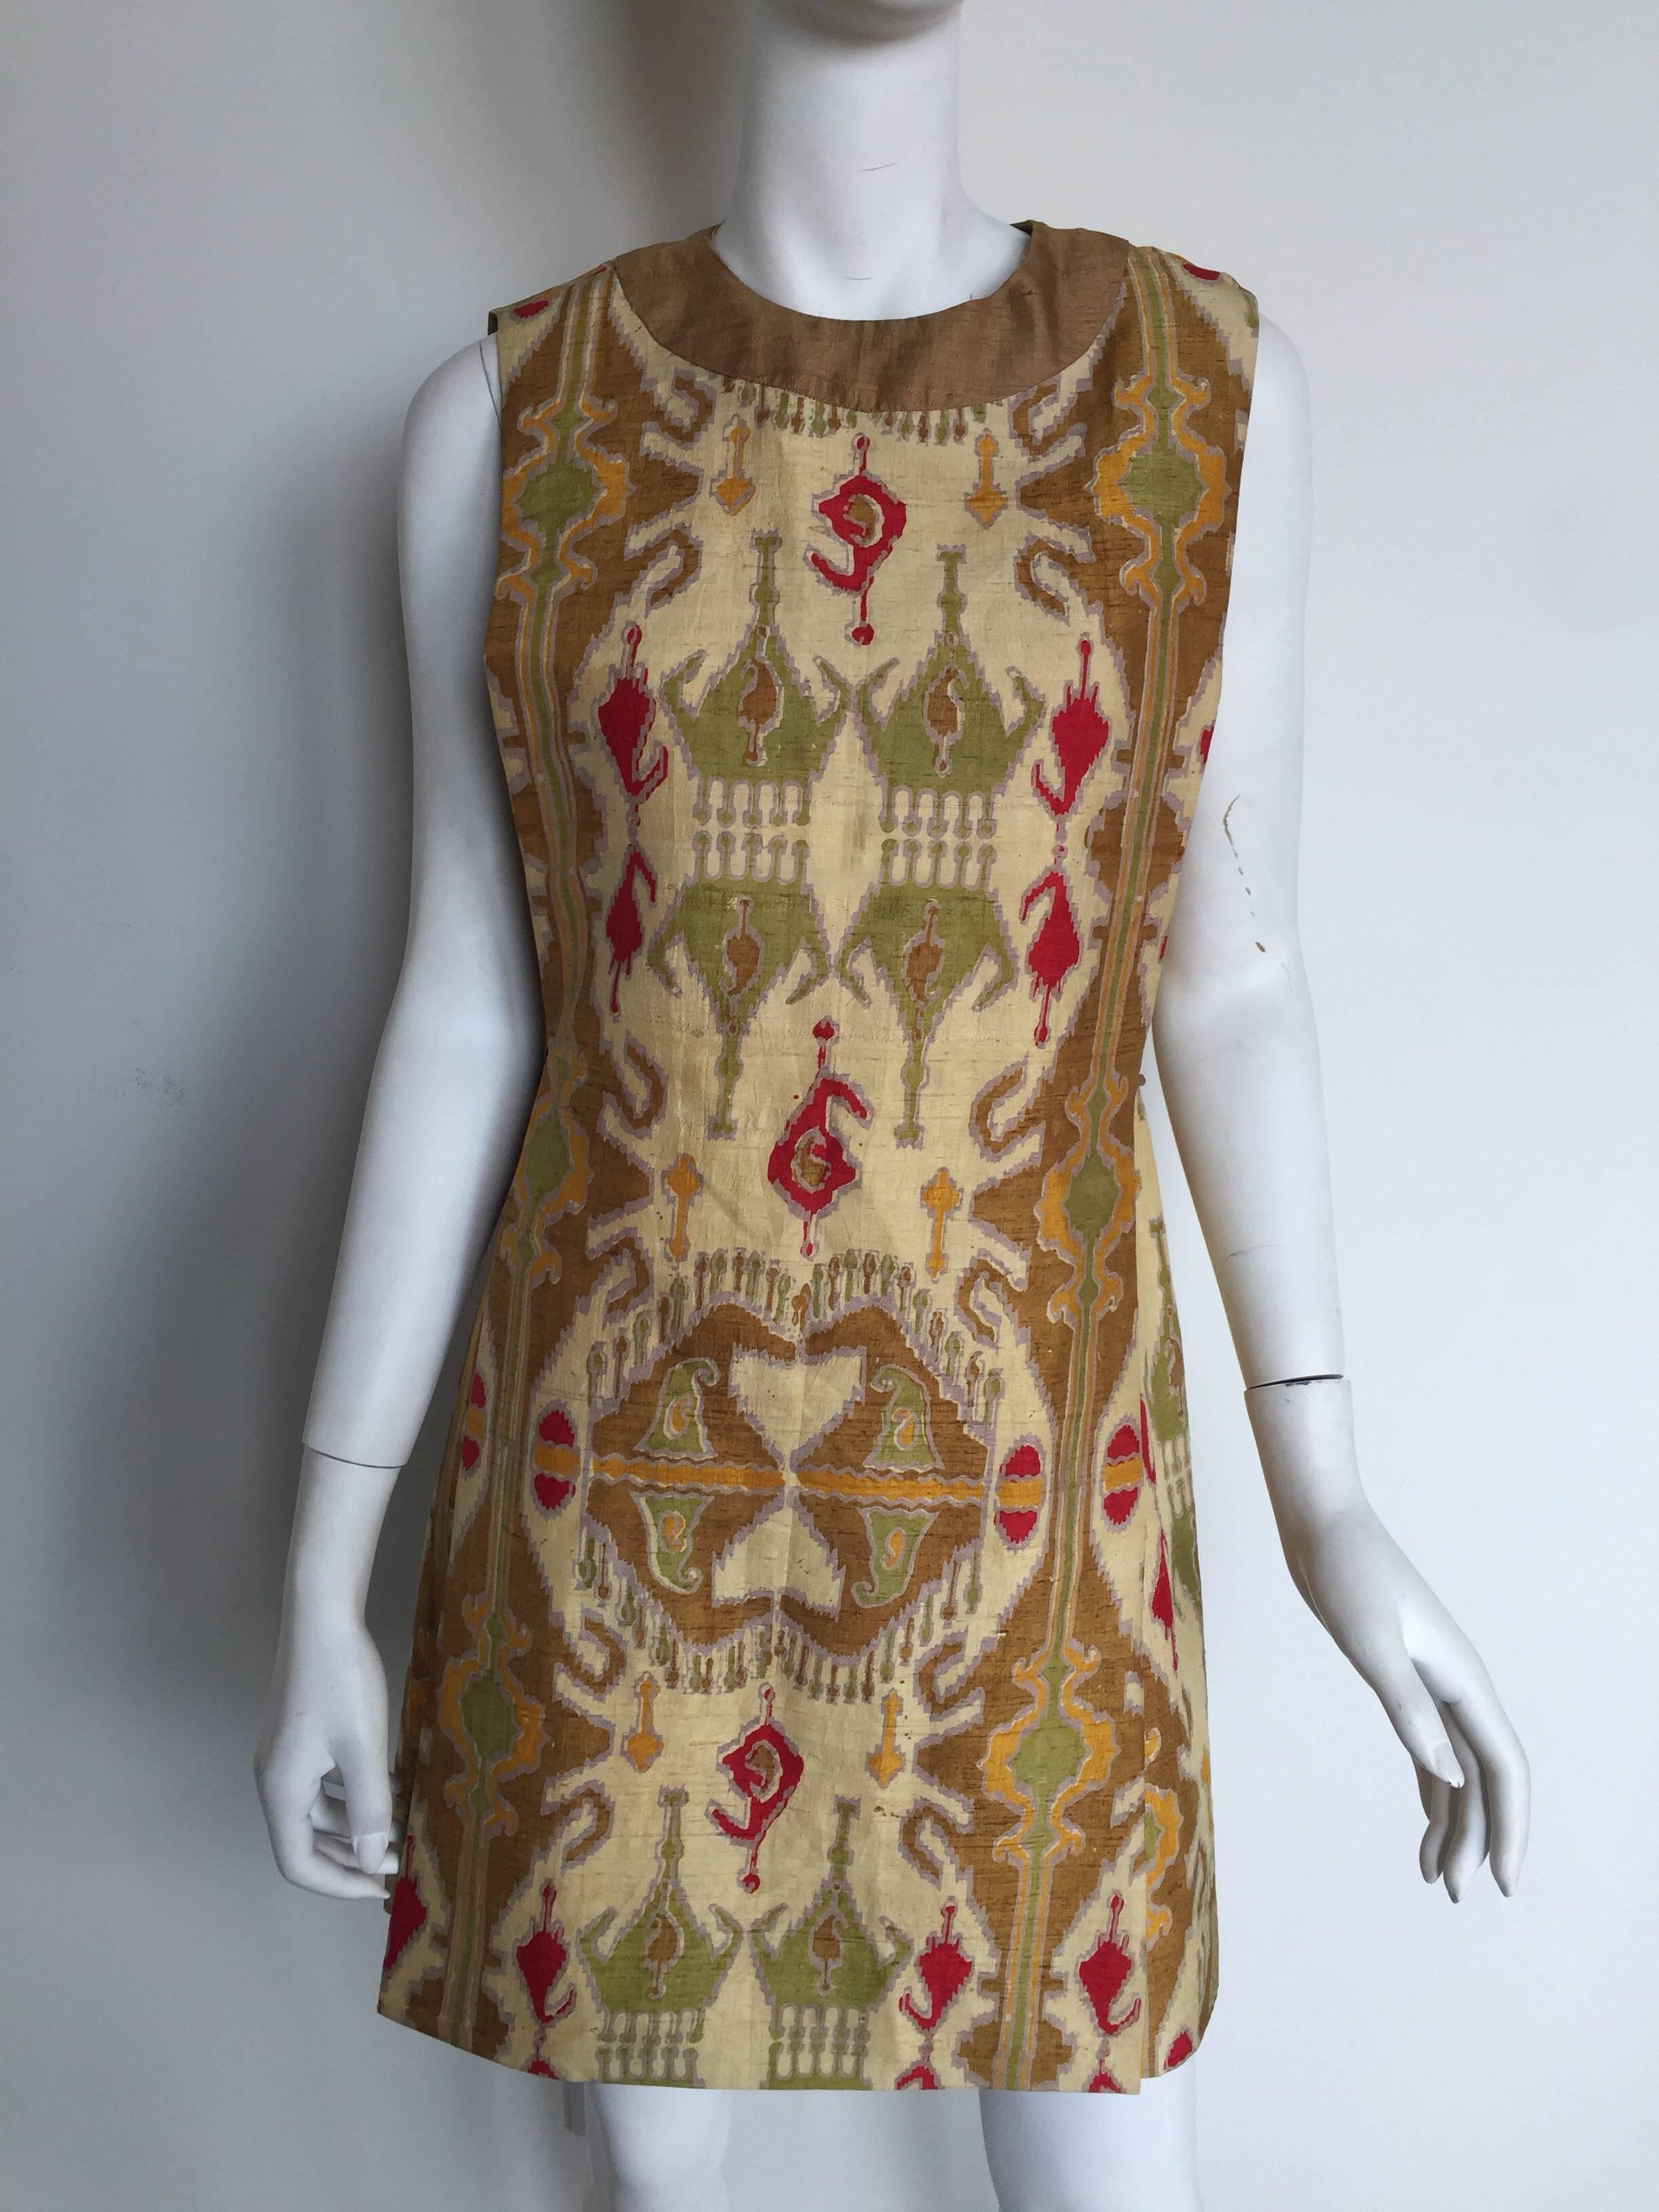 This Pierre Cardin ethnic print couture dress is from the 1960s.  It has a shift body shape with a apron silk over piece.  It has a hidden back zipper and a bow tie on one side.  It is 100% silk woven in India and labeled a size 10 but please check